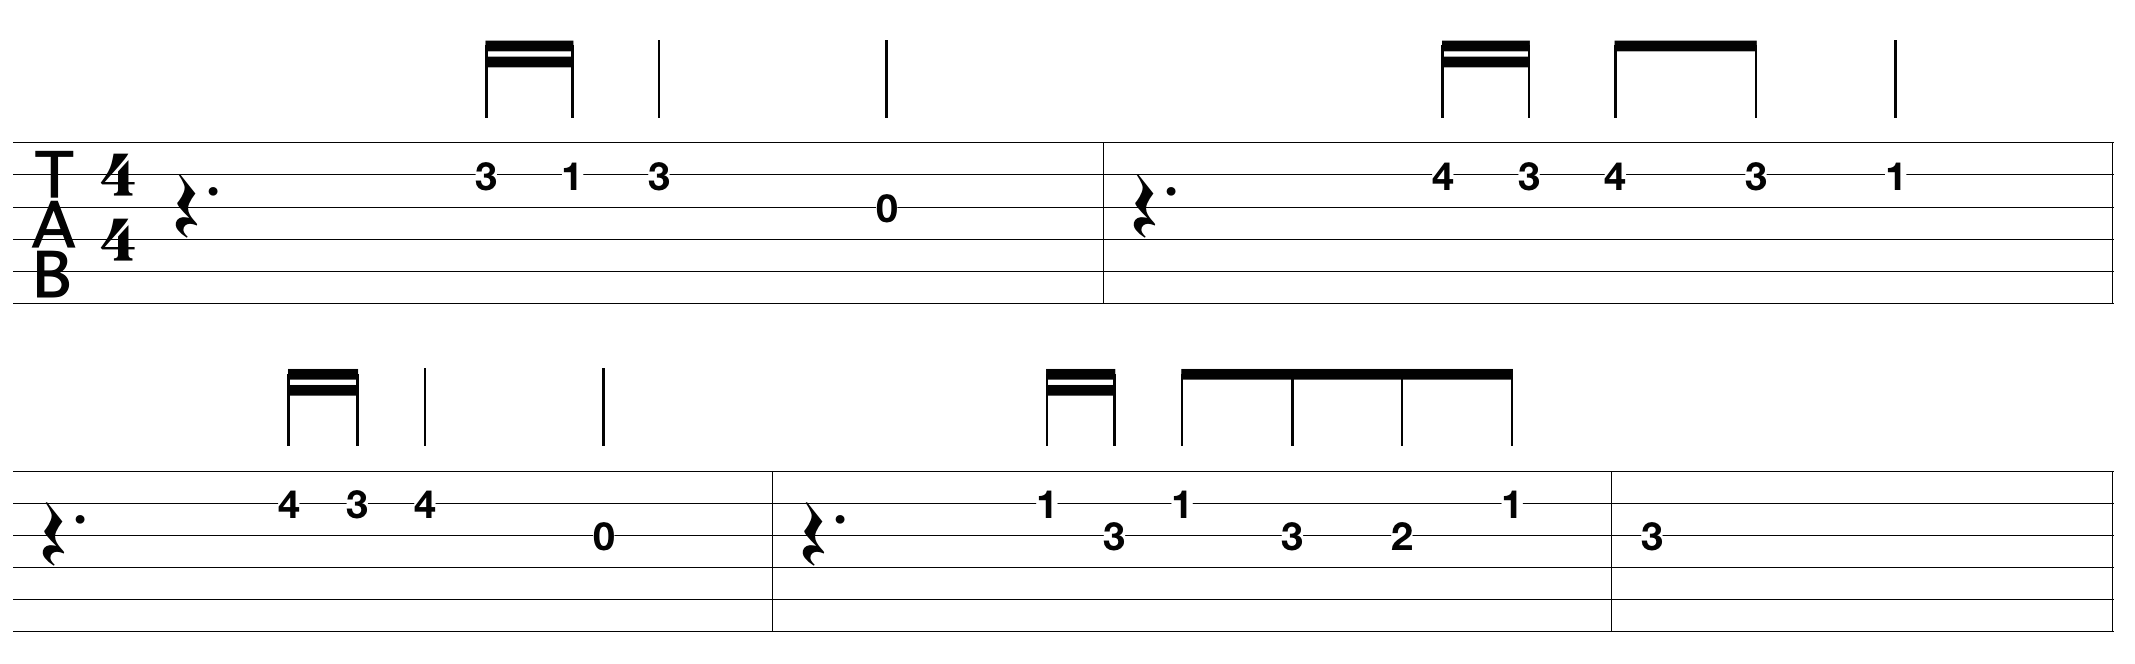 easy-guitar-tabs-for-kids_1.png